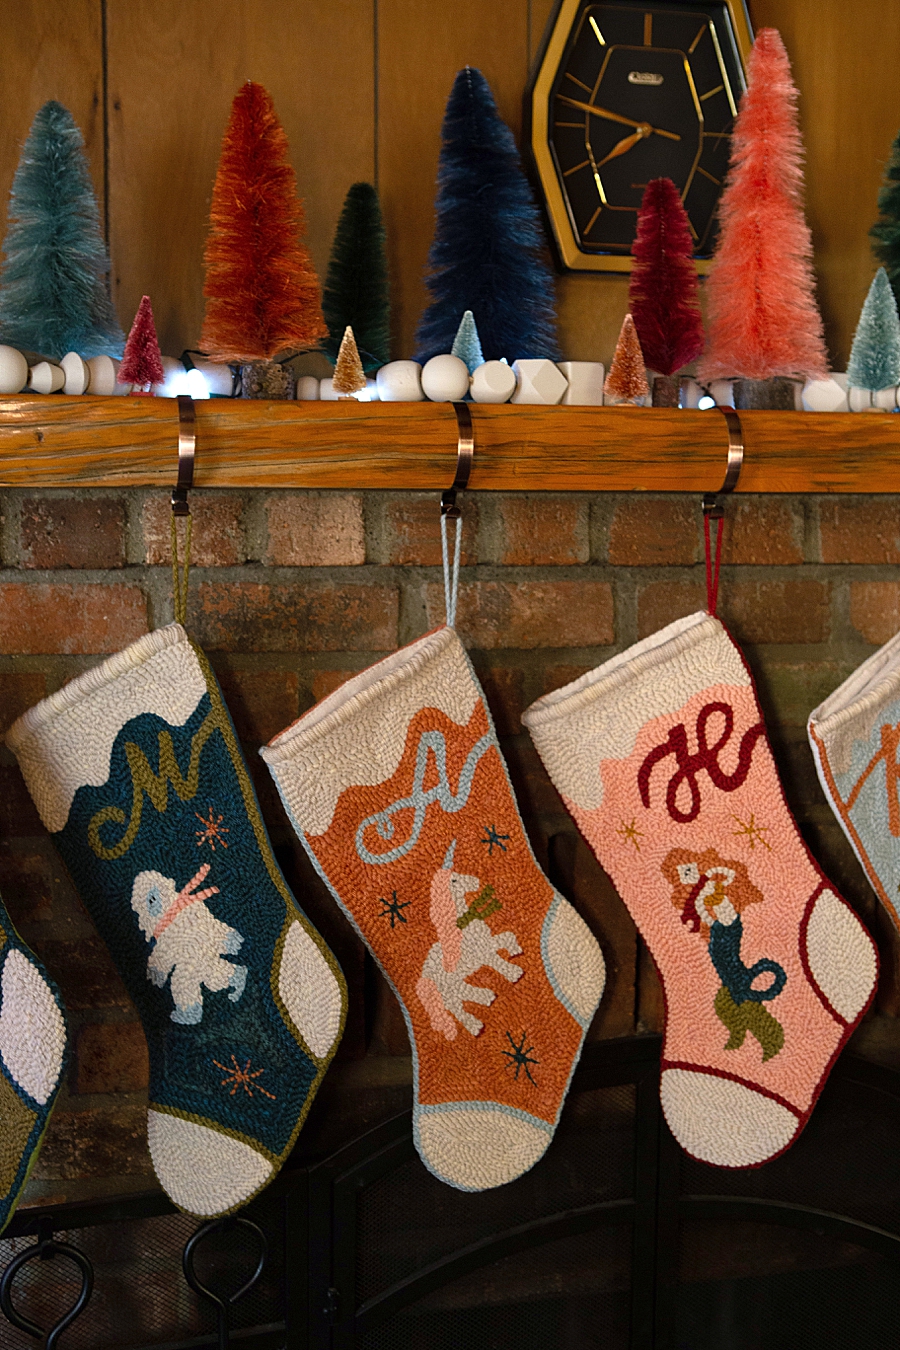 How to make your own punch needle stockings!